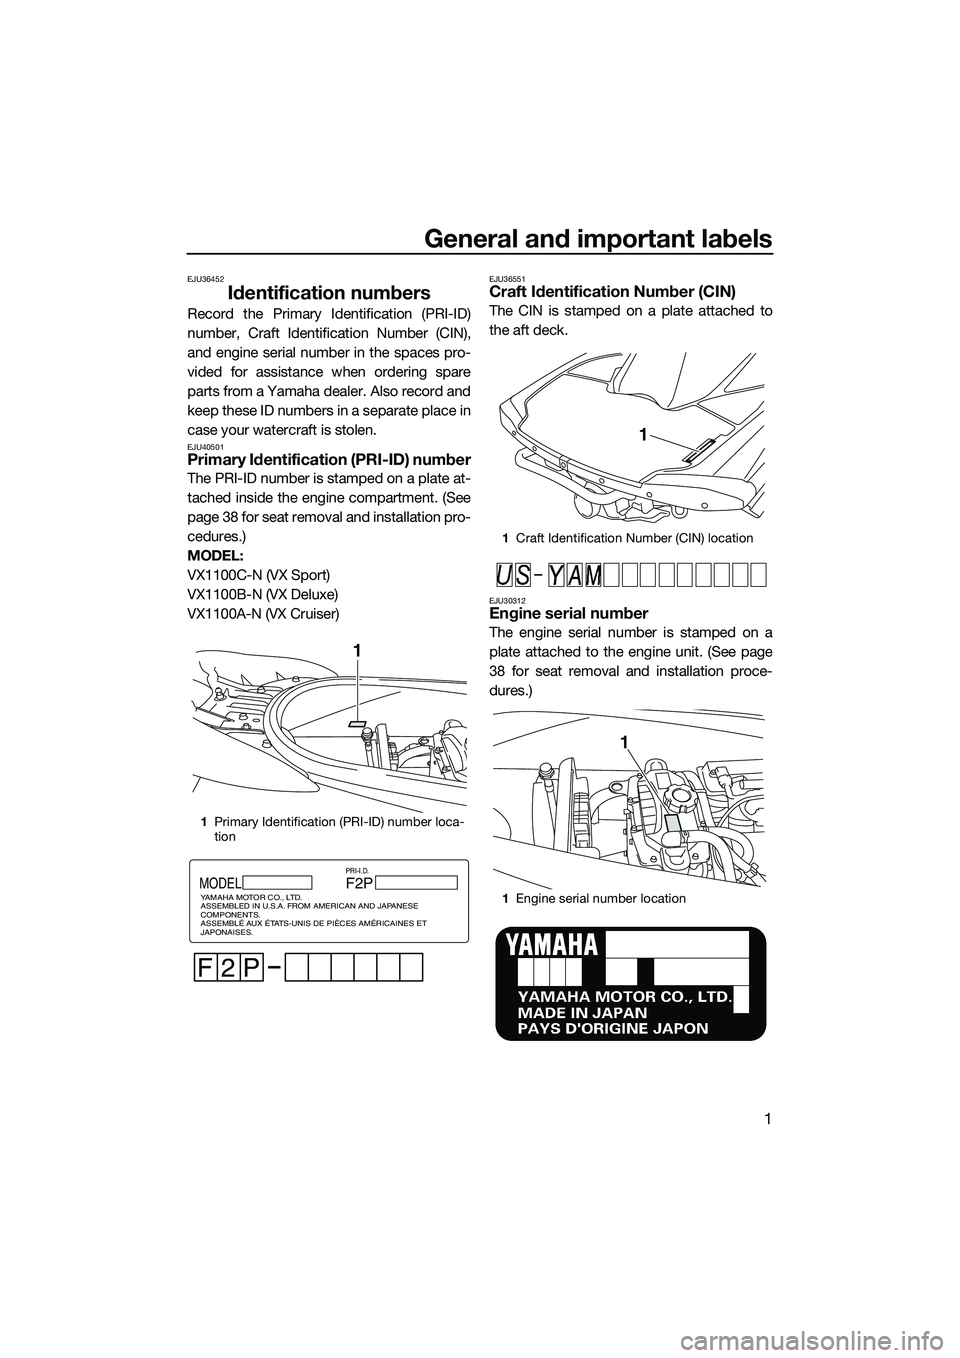 YAMAHA VX SPORT 2014  Owners Manual General and important labels
1
EJU36452
Identification numbers
Record the Primary Identification (PRI-ID)
number, Craft Identification Number (CIN),
and engine serial number in the spaces pro-
vided f